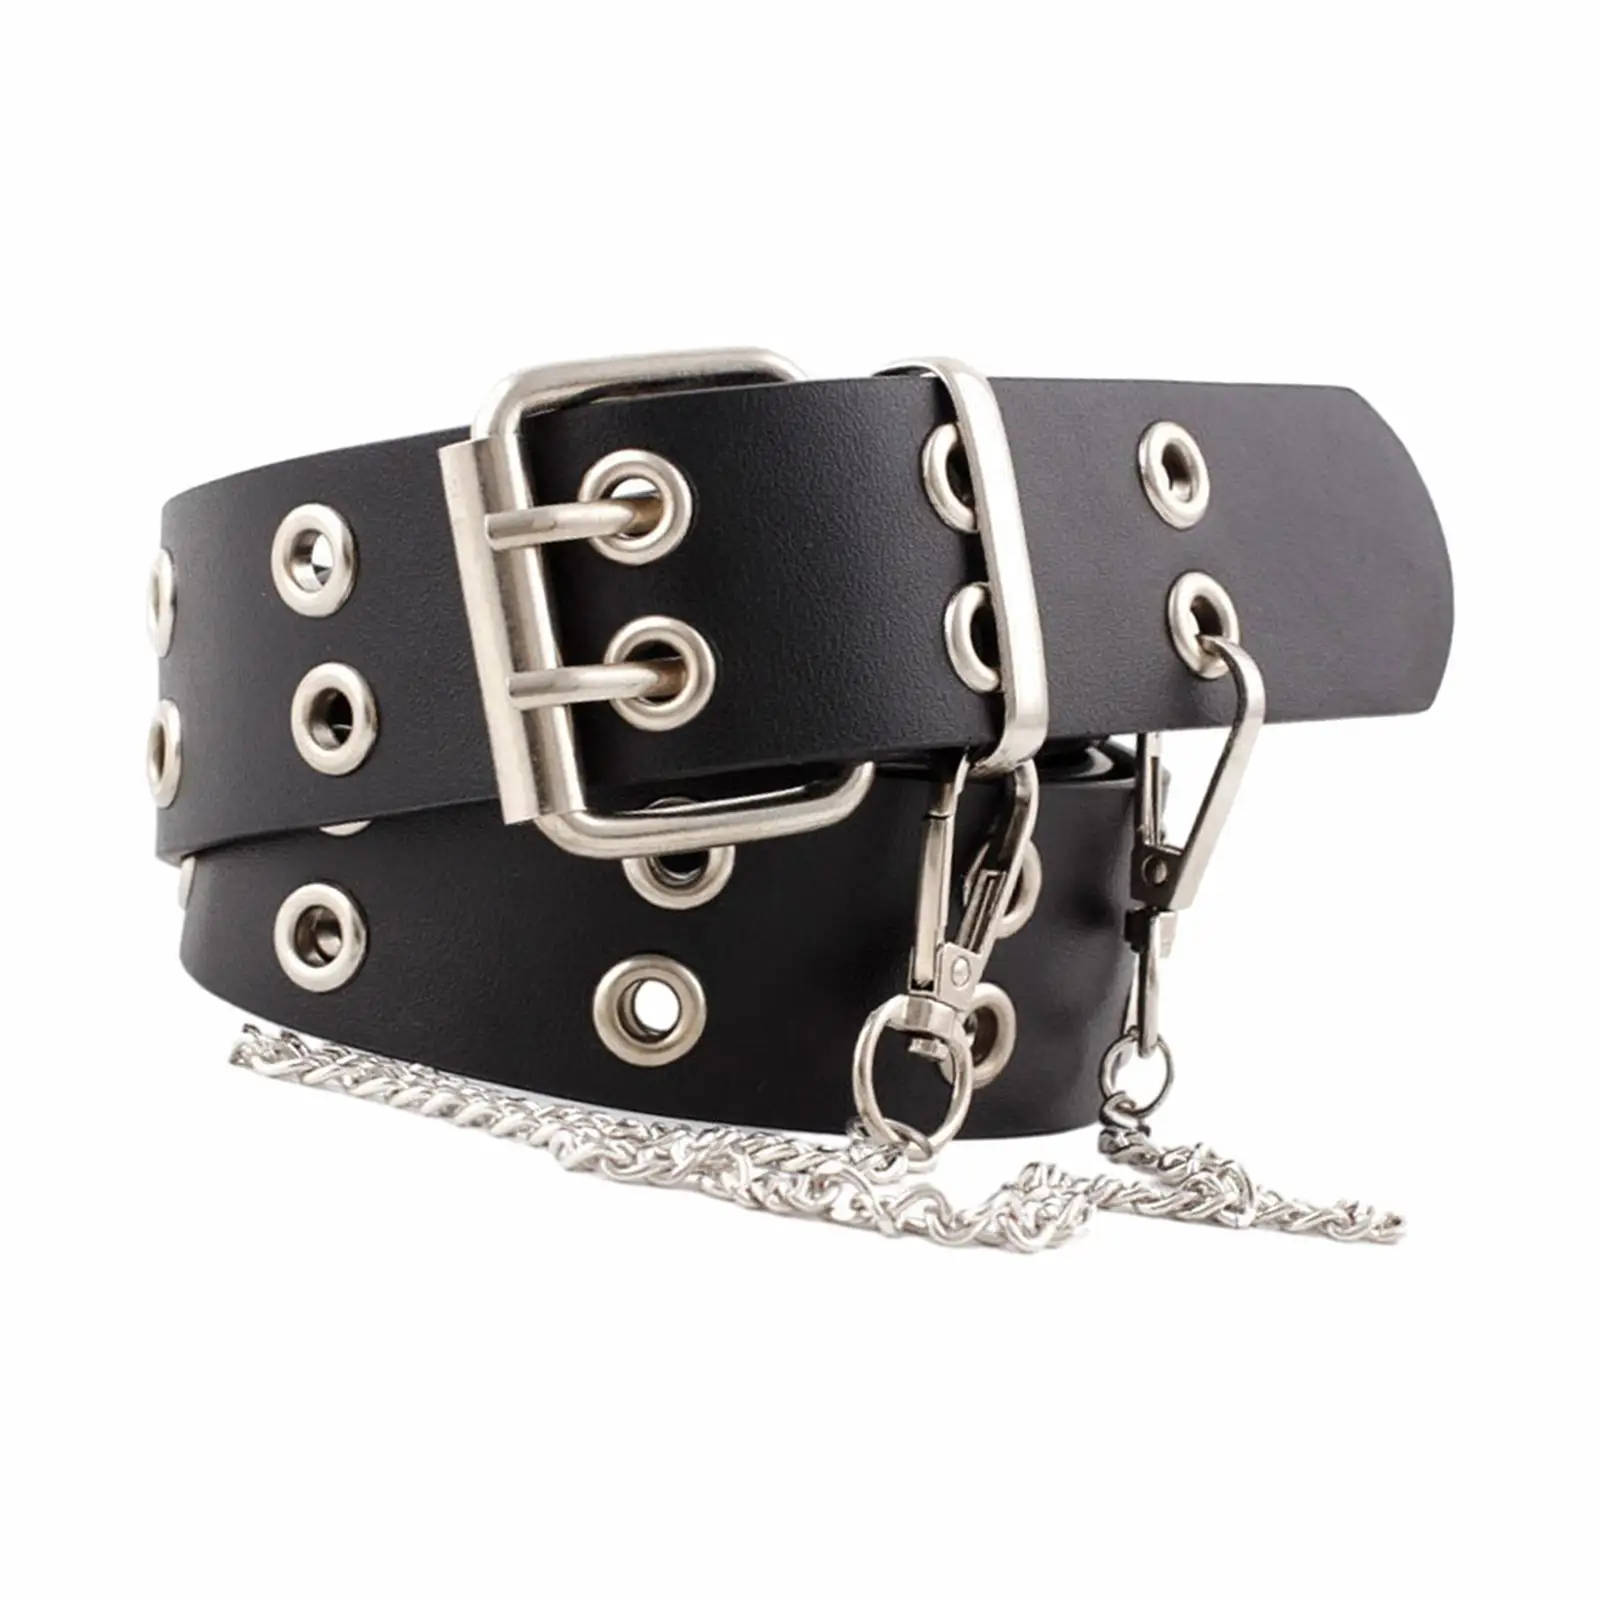 Double Grommet Belt Gothic Eyelet Punk PU Leather Double Prong Buckle Rock Womens Waist Belt for Club Cosplay Jeans Party Men